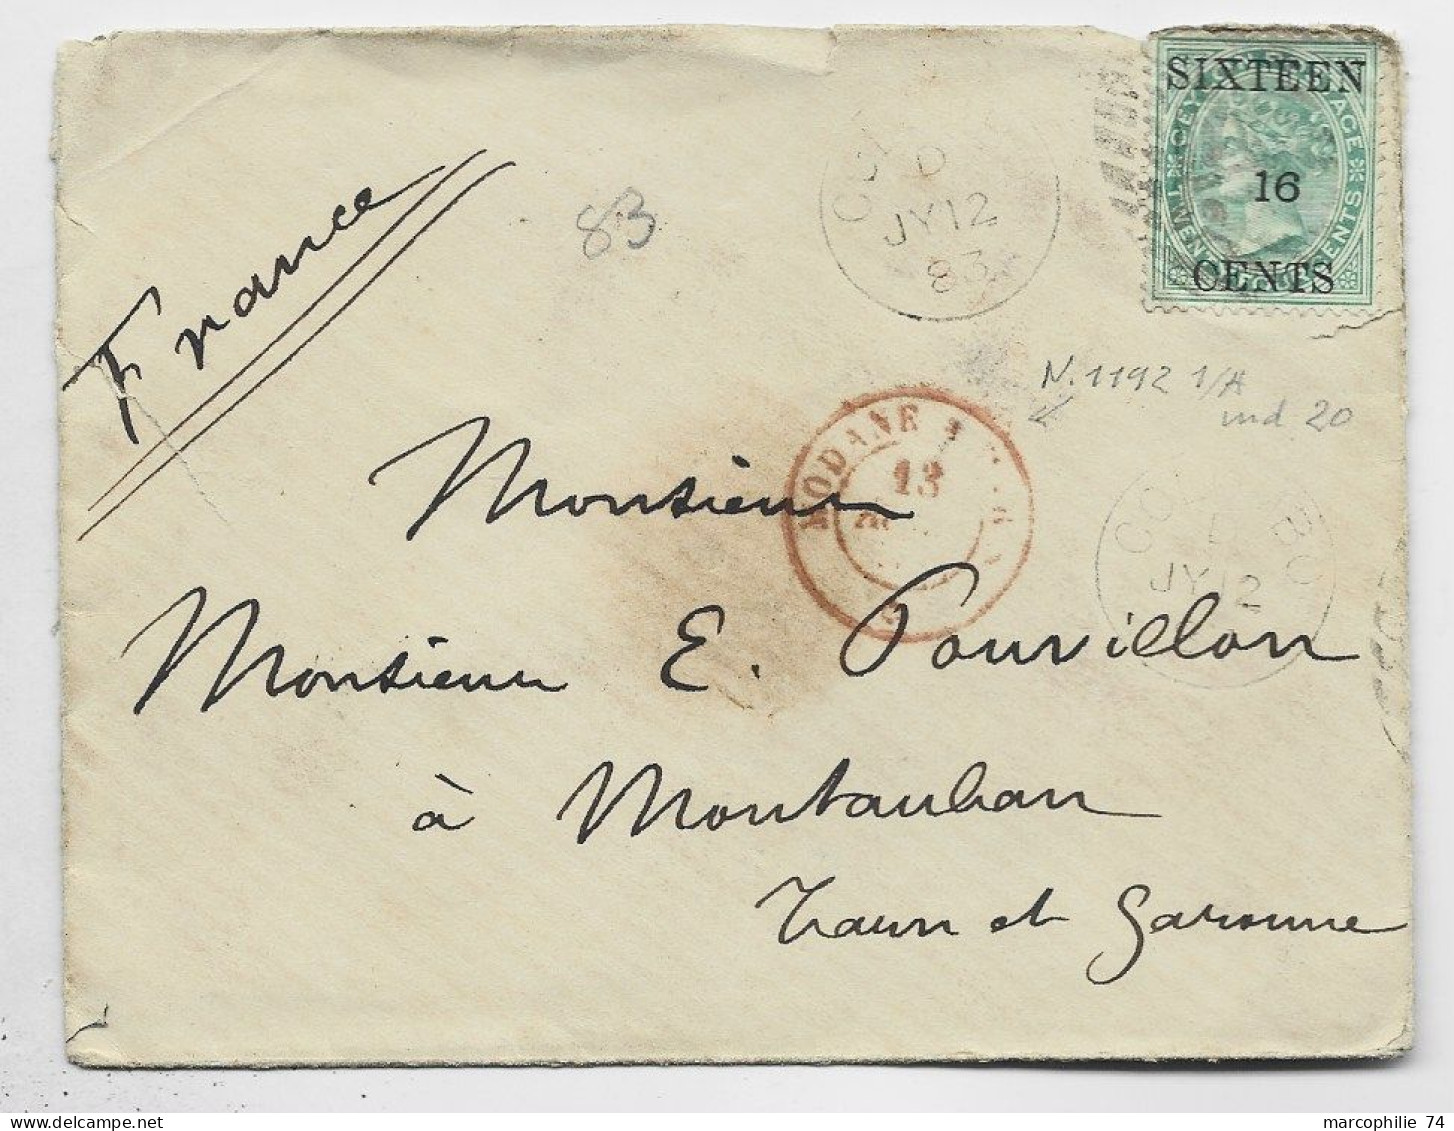 CEYLAN TWENTY FOUR CENTS SIXTEEN CENTS SOLO LETTRE COVER COLOMBO JY 12 1883 TO FRANCE - Ceylon (...-1947)